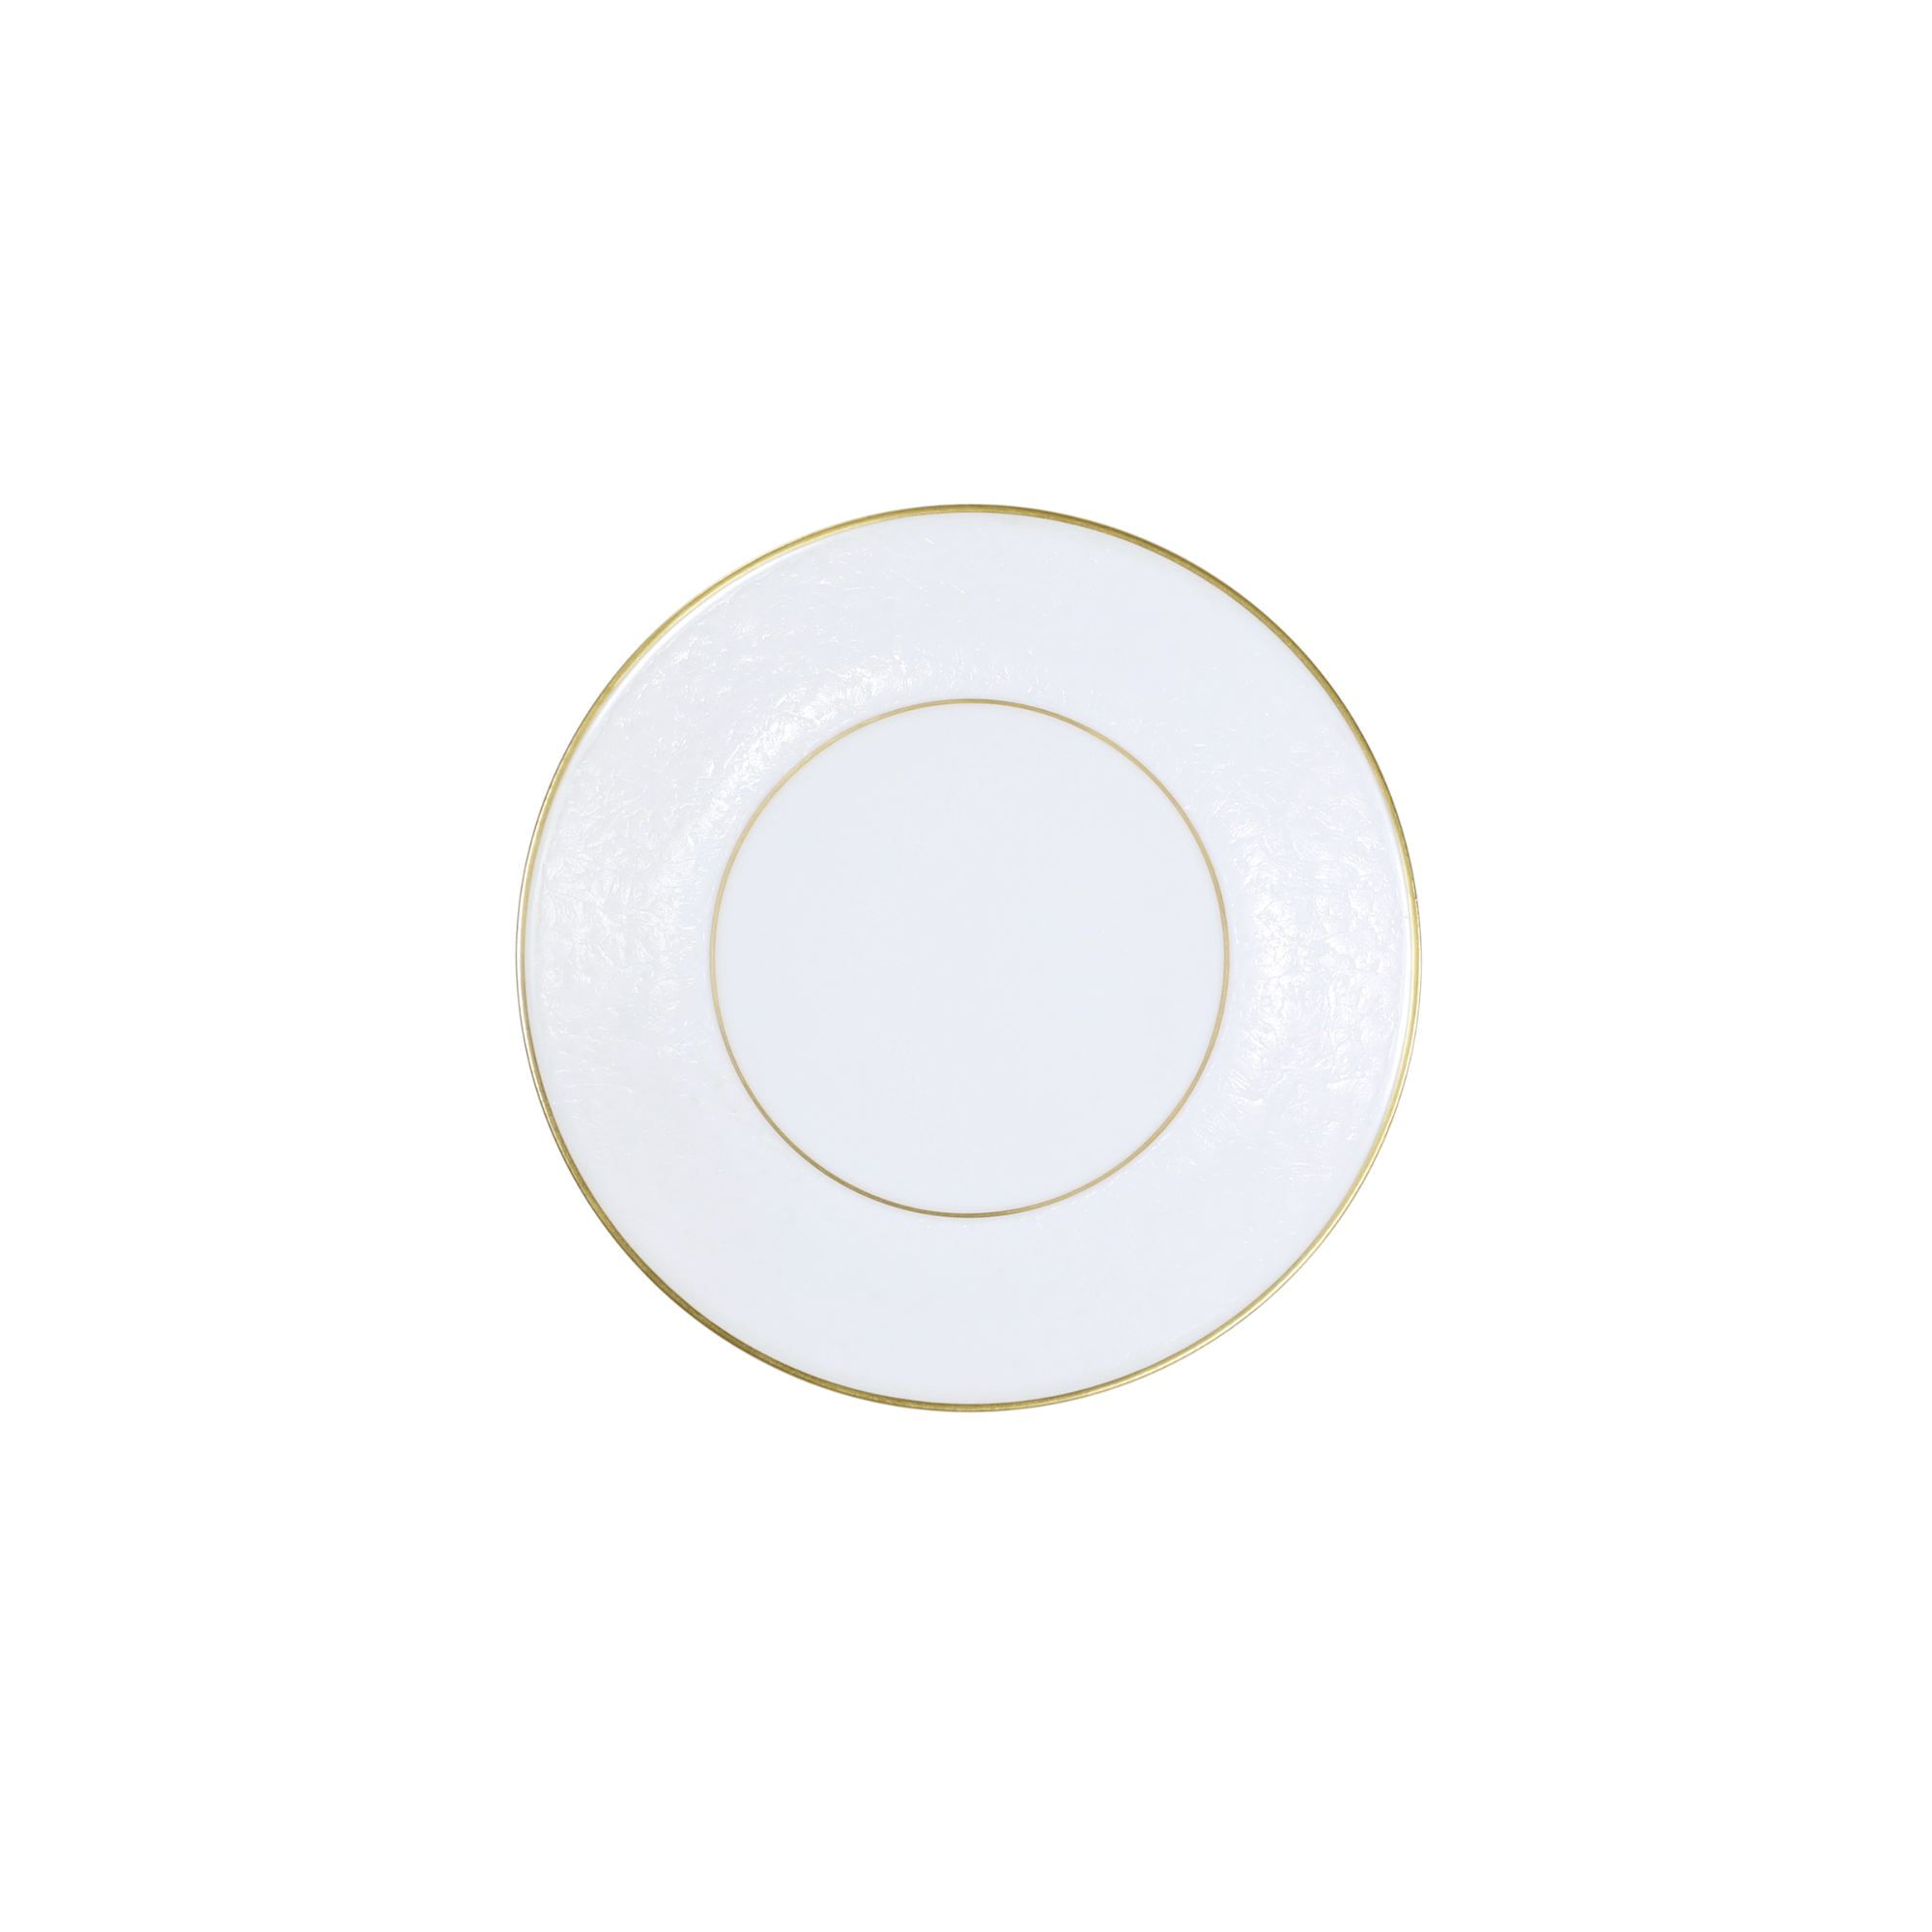 MOONSCAPE BREAD PLATE GOLD